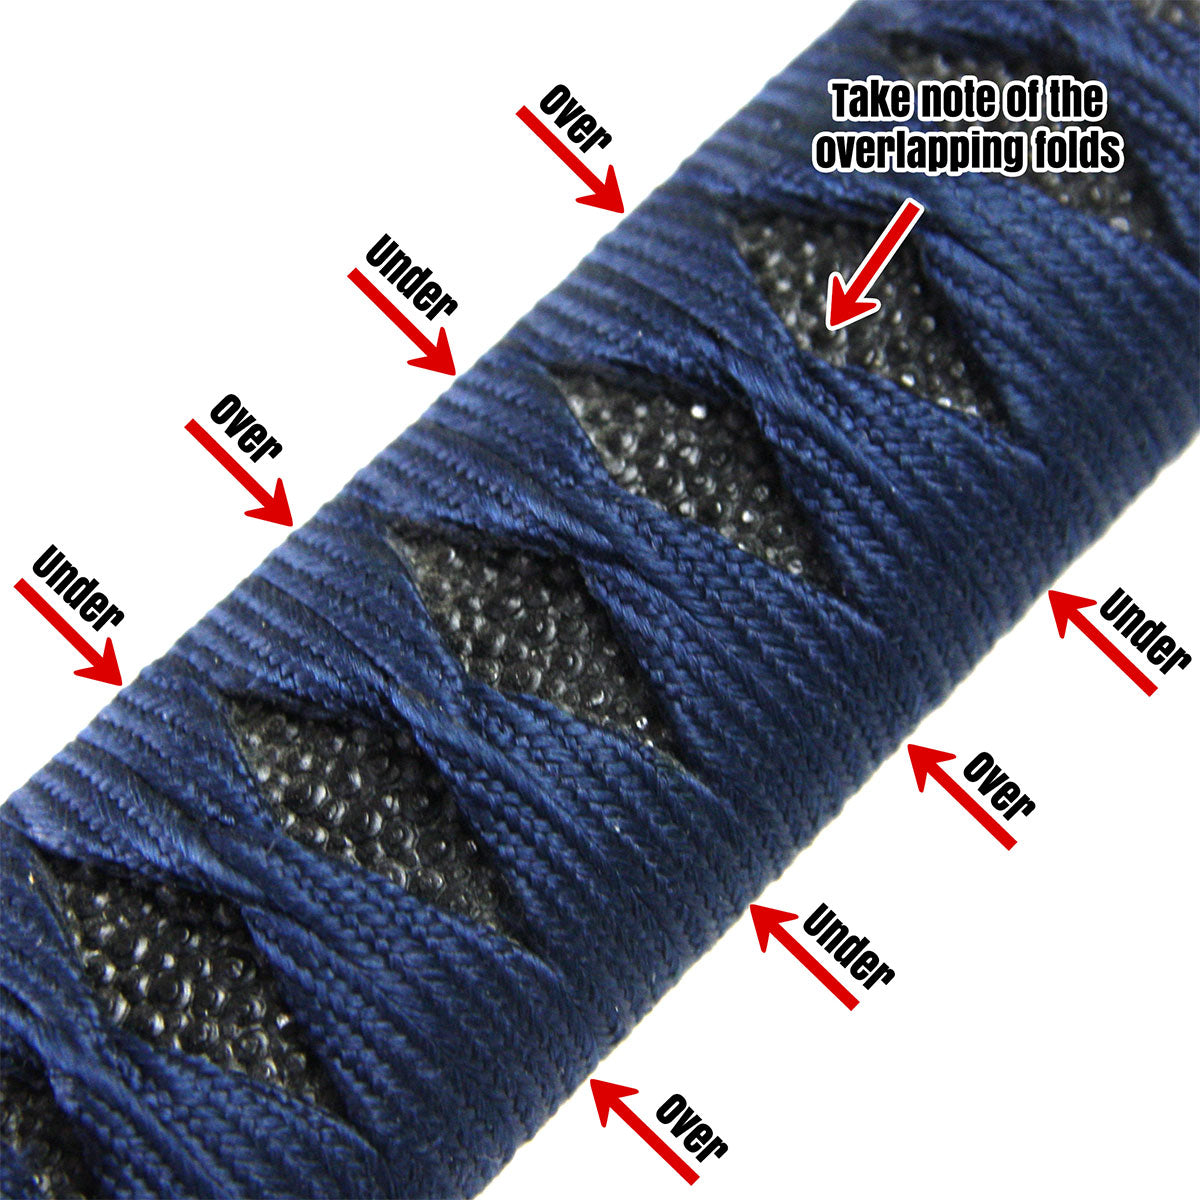 Please note how the tsuka-ito is wrapped while alternating the top and bottom tsuka-ito at each fold.